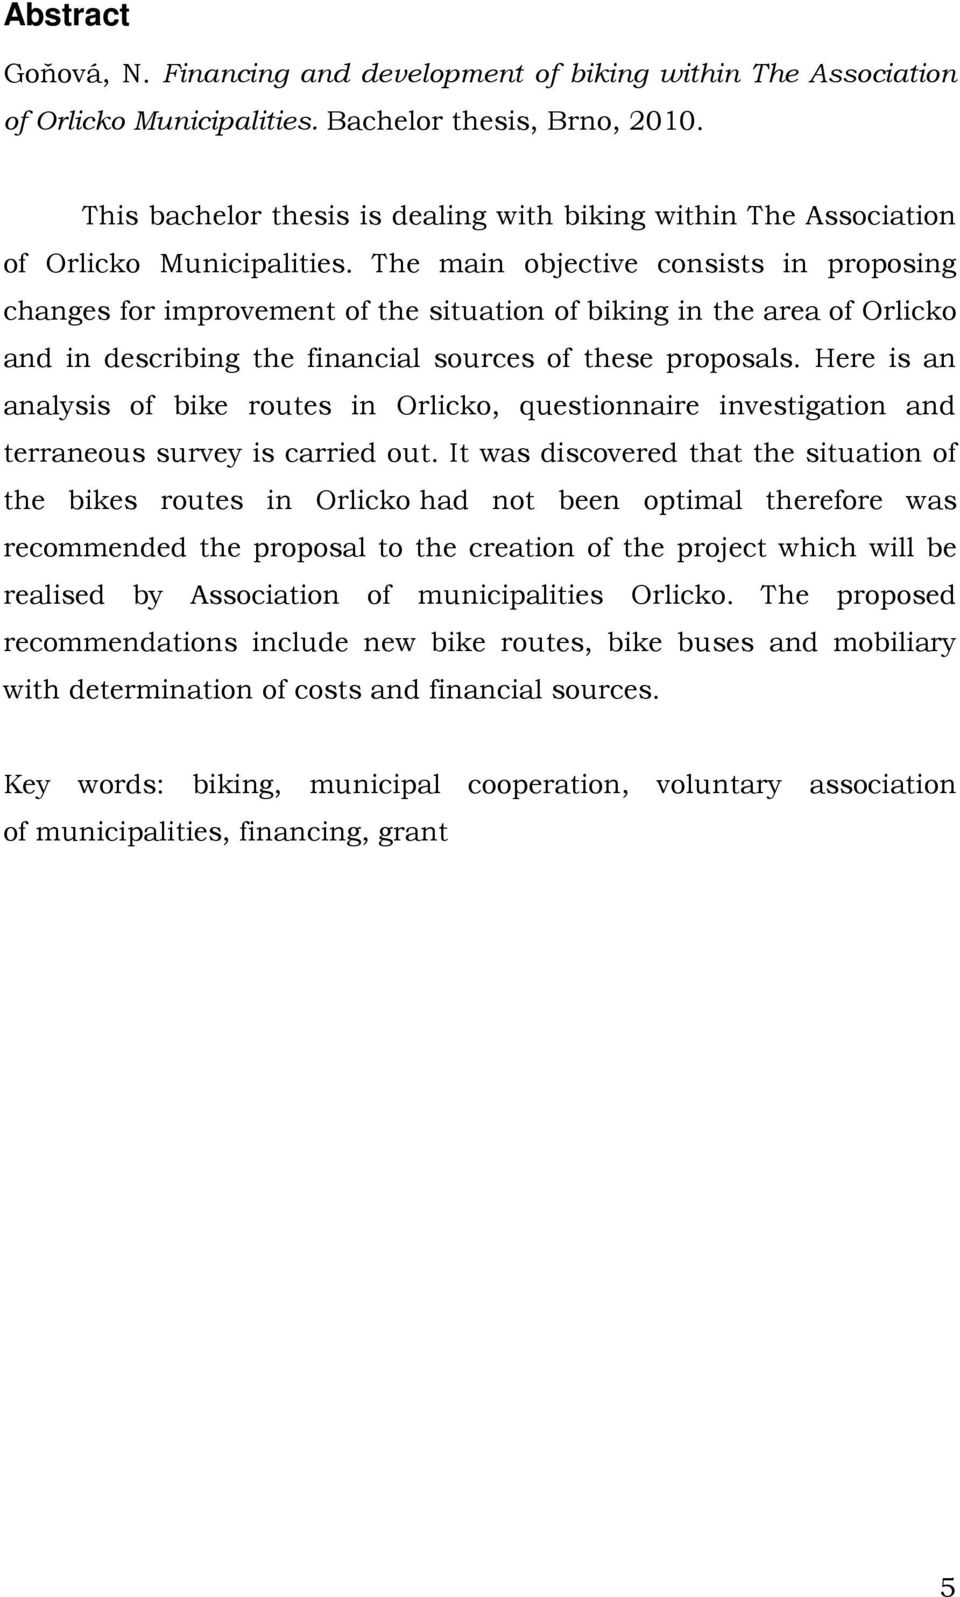 The main objective consists in proposing changes for improvement of the situation of biking in the area of Orlicko and in describing the financial sources of these proposals.